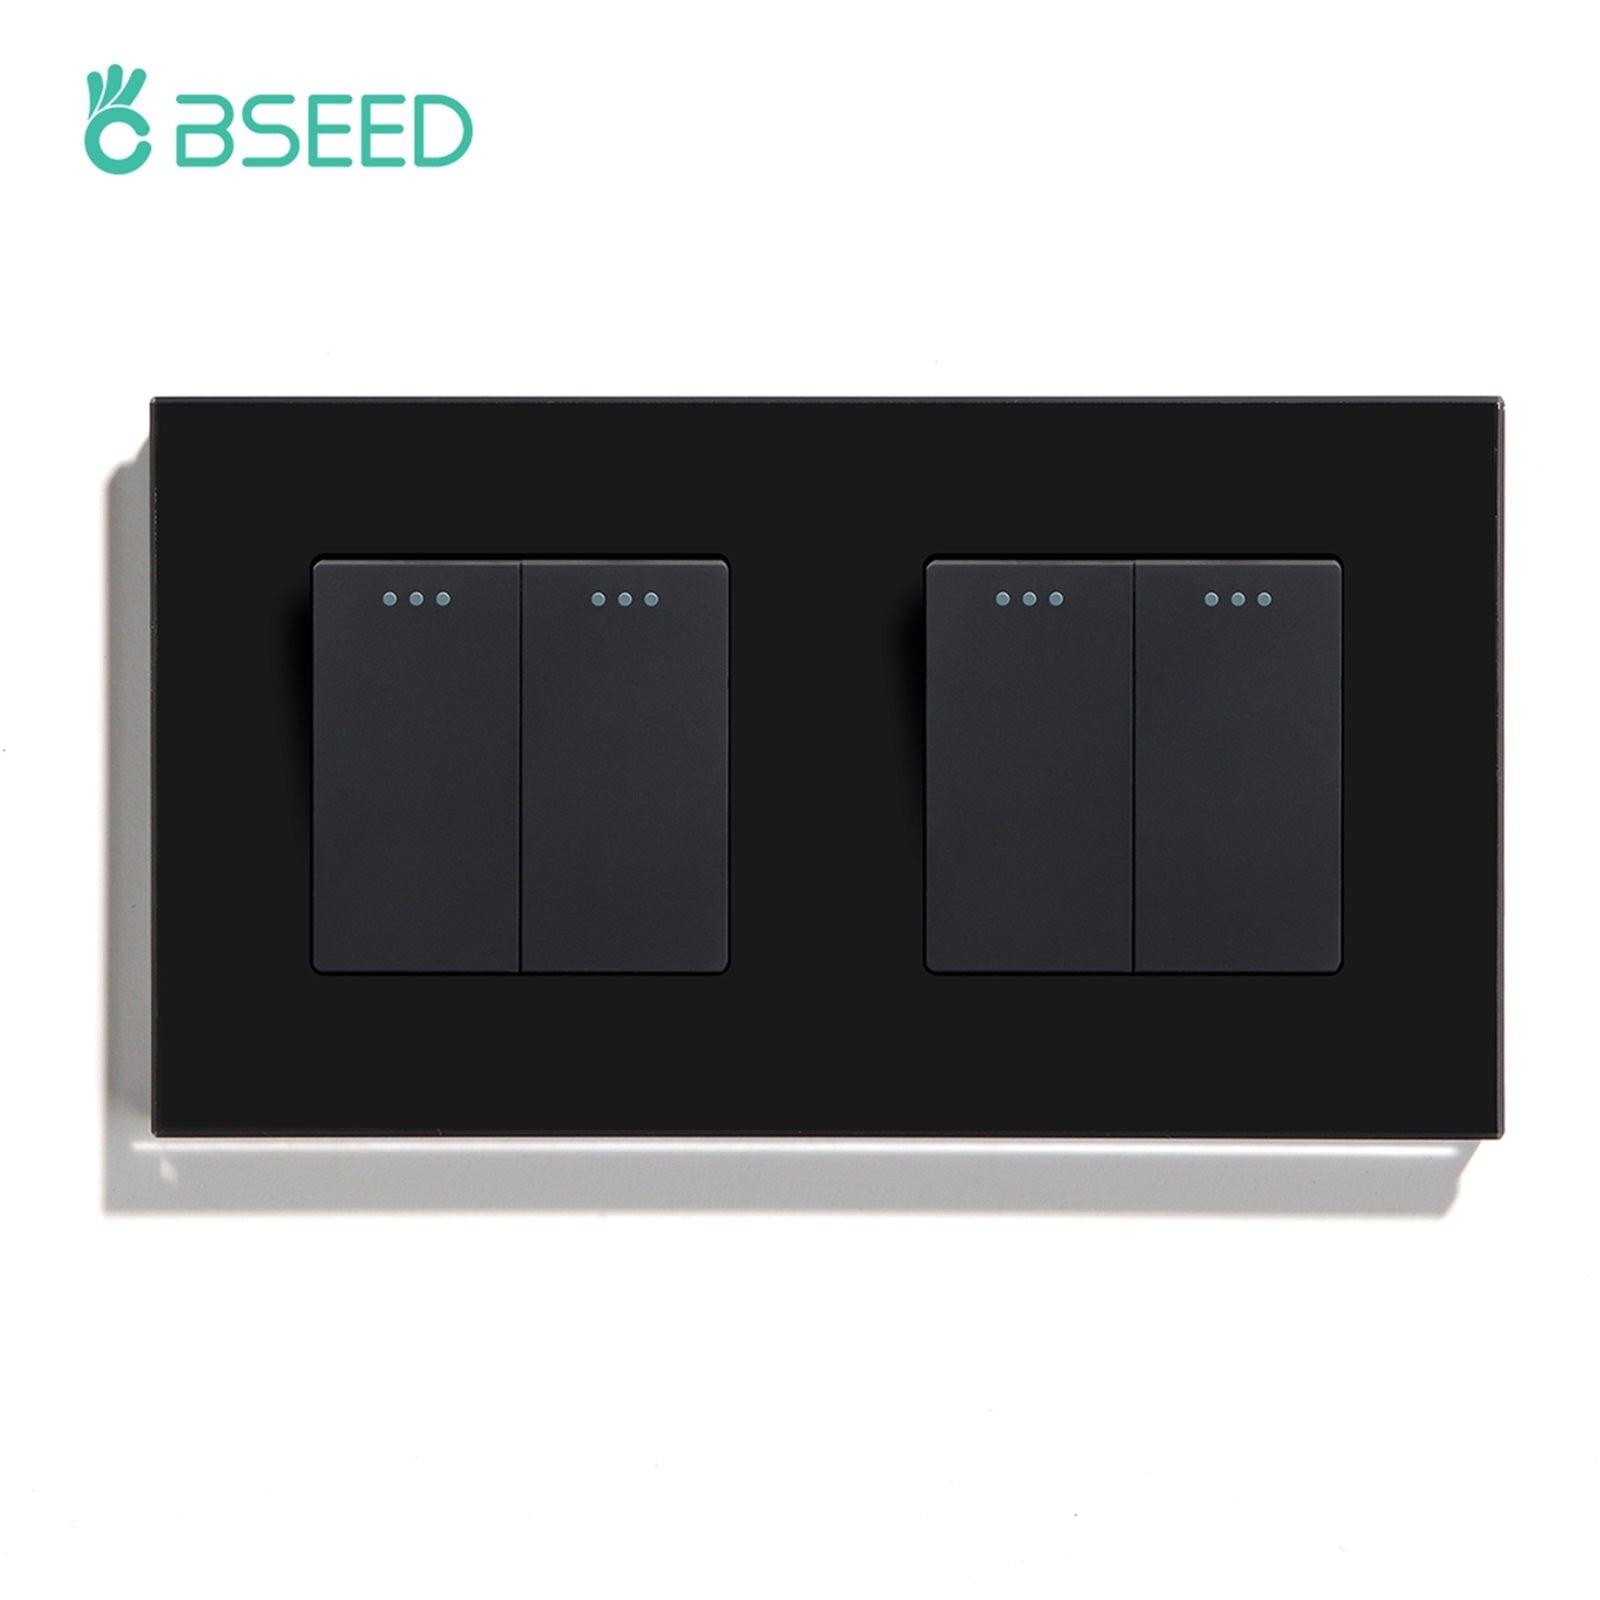 Bseed Button Light Switch 1/2/3 Gang 1Way Mechanical Switches Crossbar Switch 照明开关 Bseedswitch Black 2Gang+2Gang 